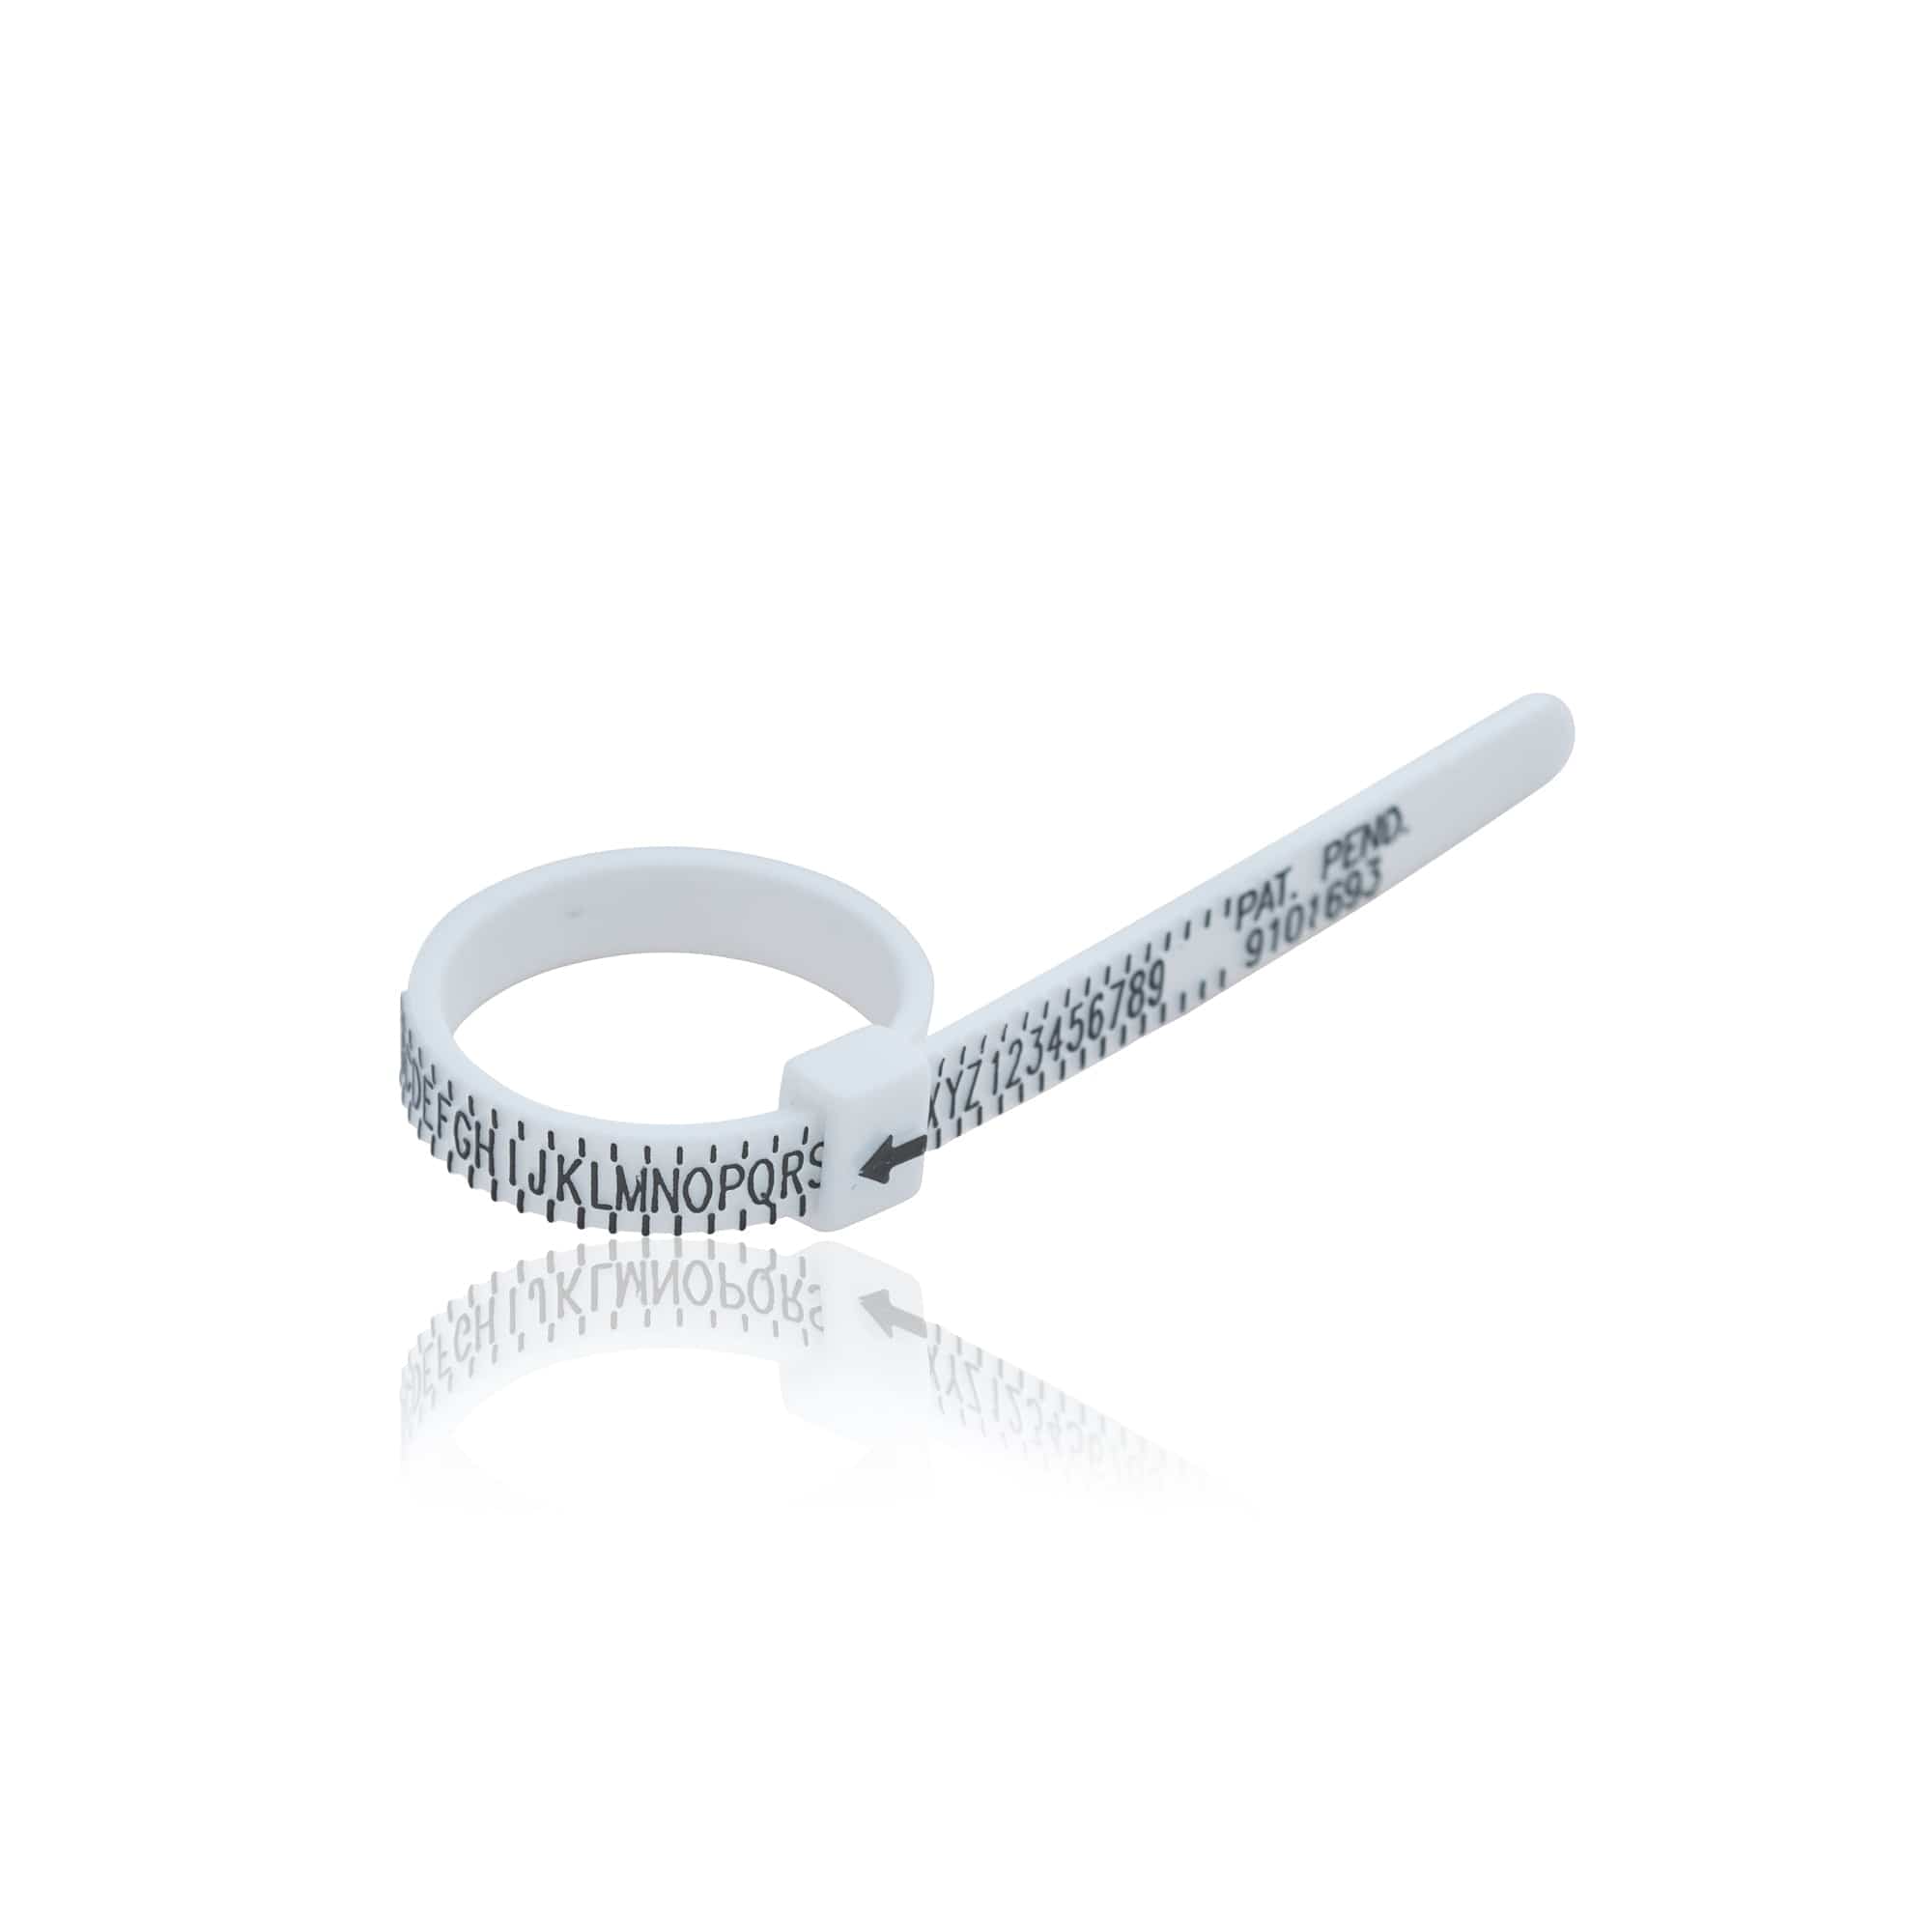 Ring Size Chart & Measurement Guide at Michael Hill Canada